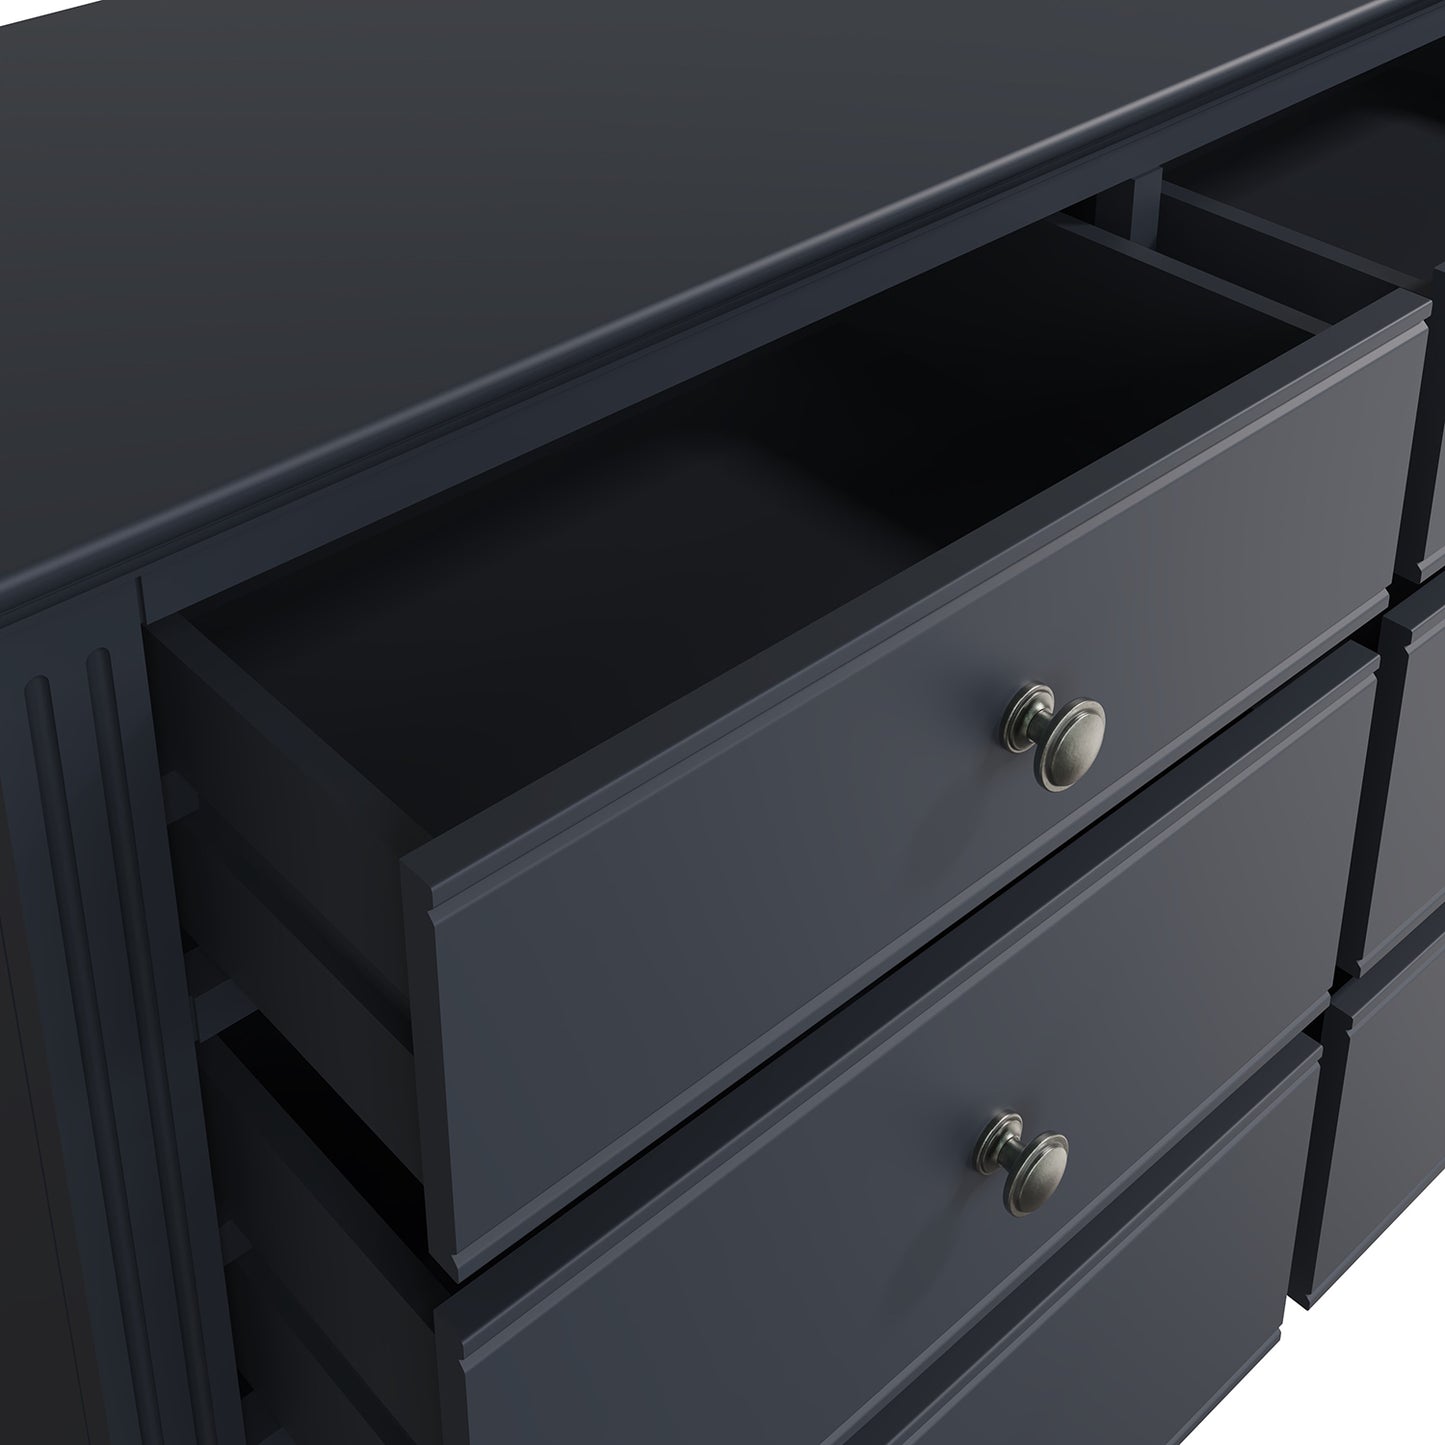 Billingford Charcoal Chest of Drawers - 6 Drawer